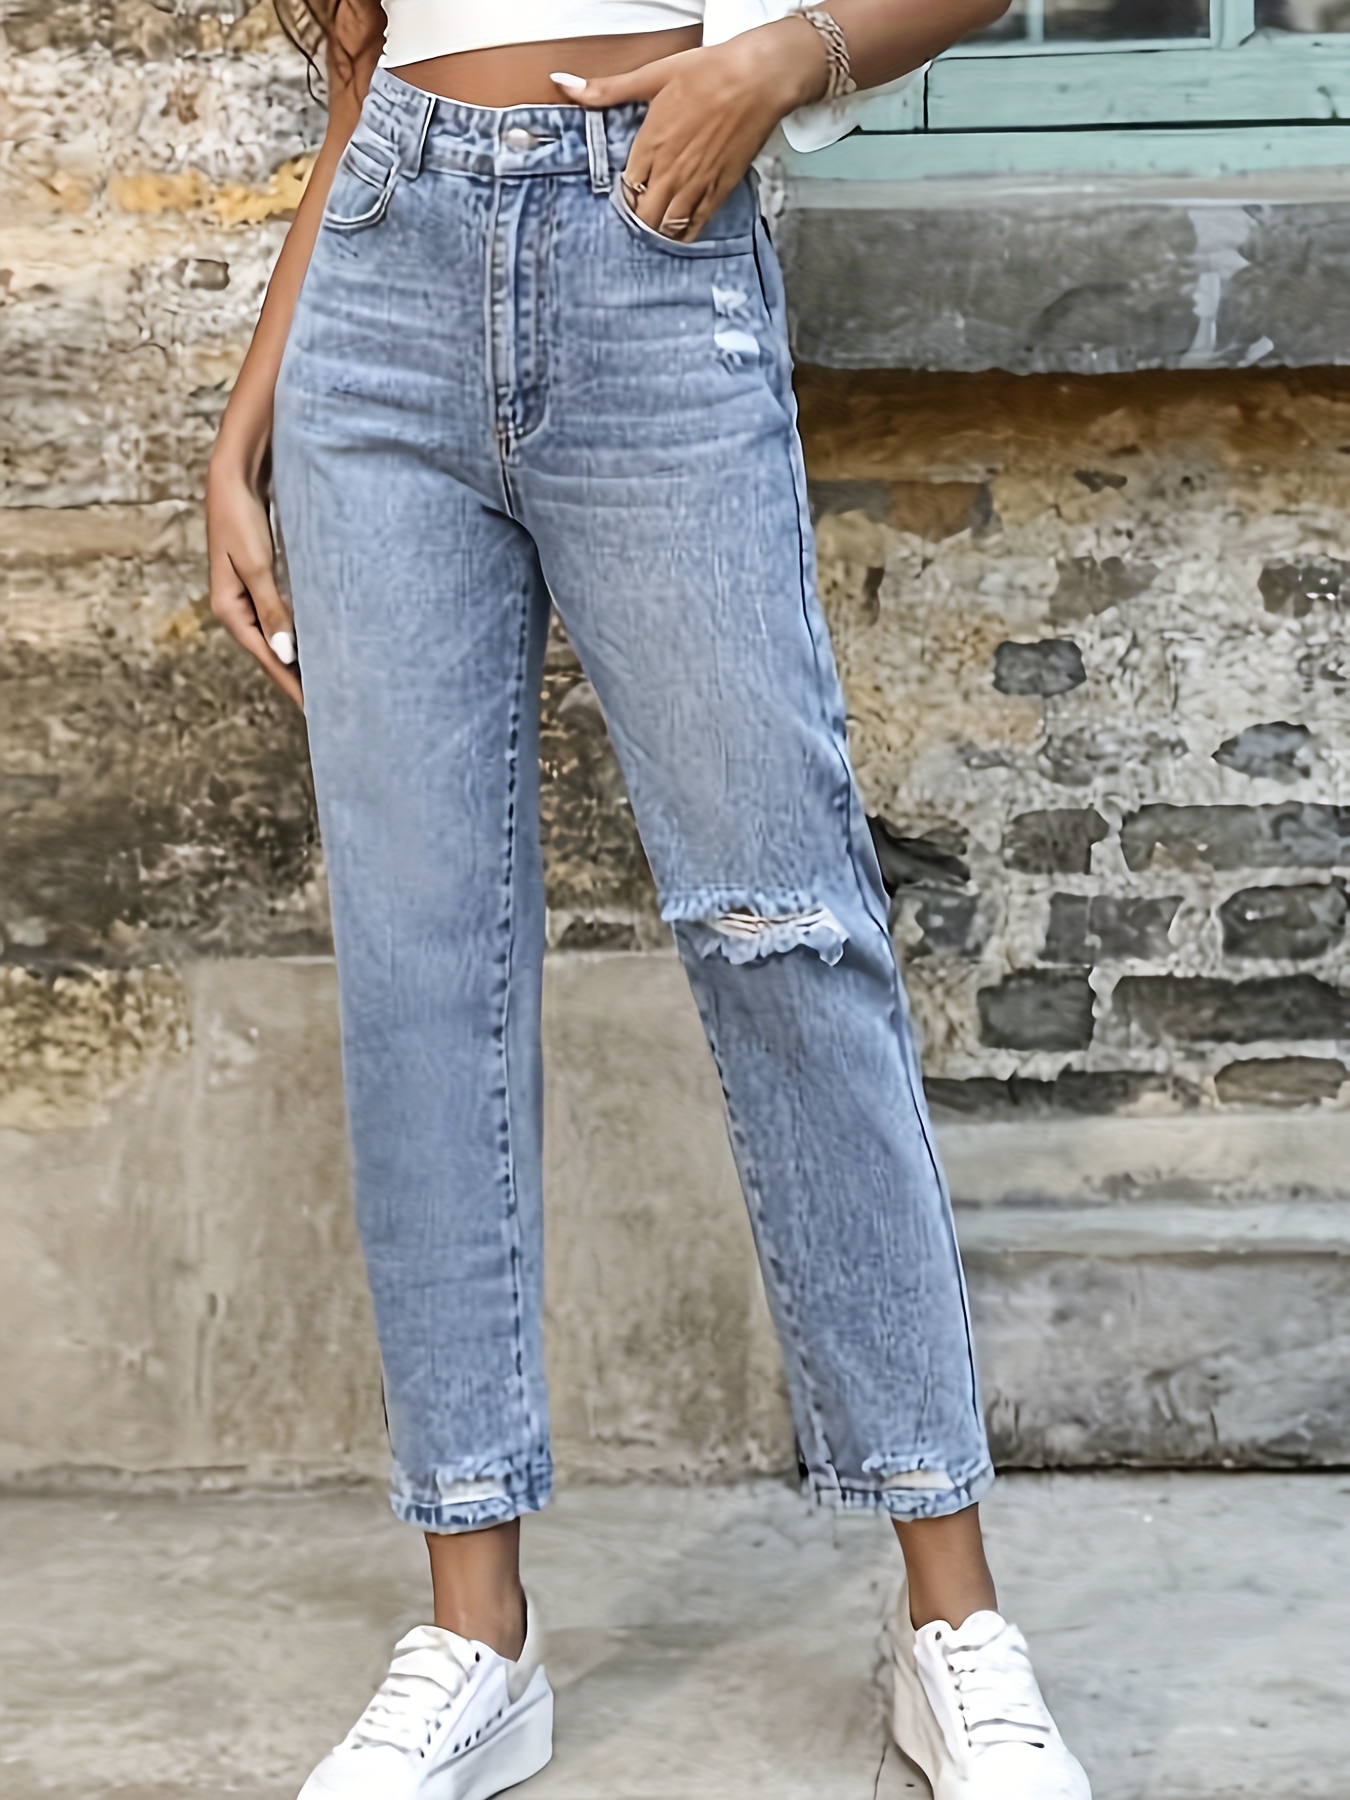 Loose Fit Versatile Mom Jeans, Slant Pockets Non-Stretch Casual Tapered  Jeans, Women's Denim Jeans & Clothing